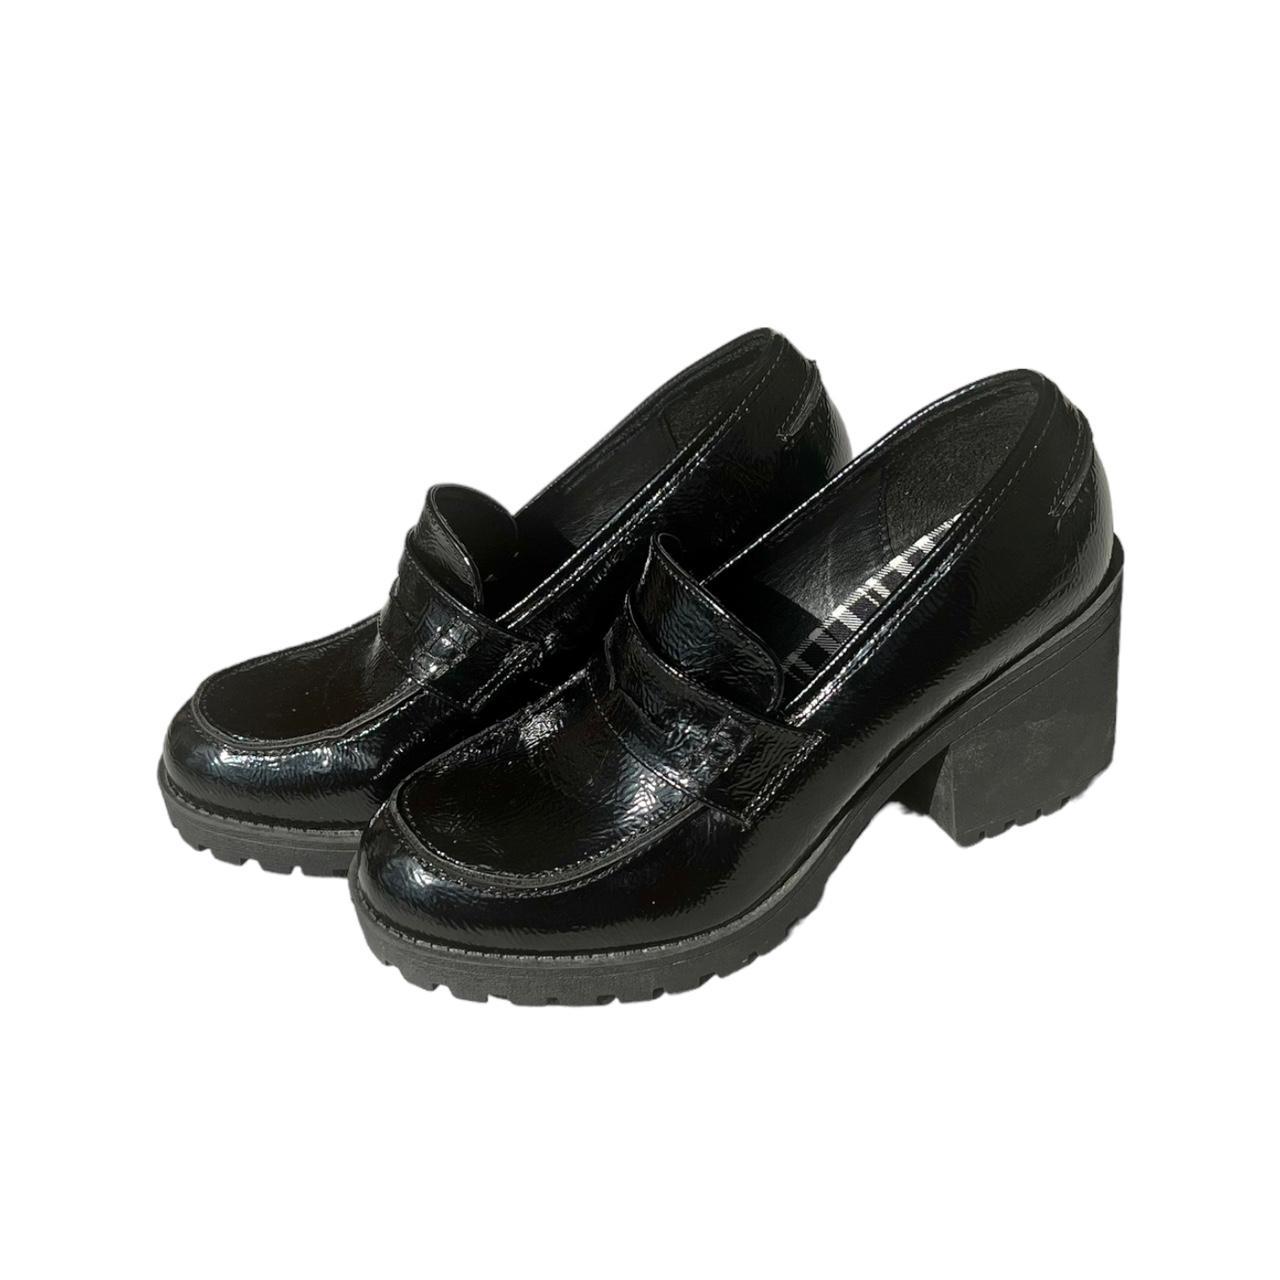 Dirty Laundry Women's Black Loafers